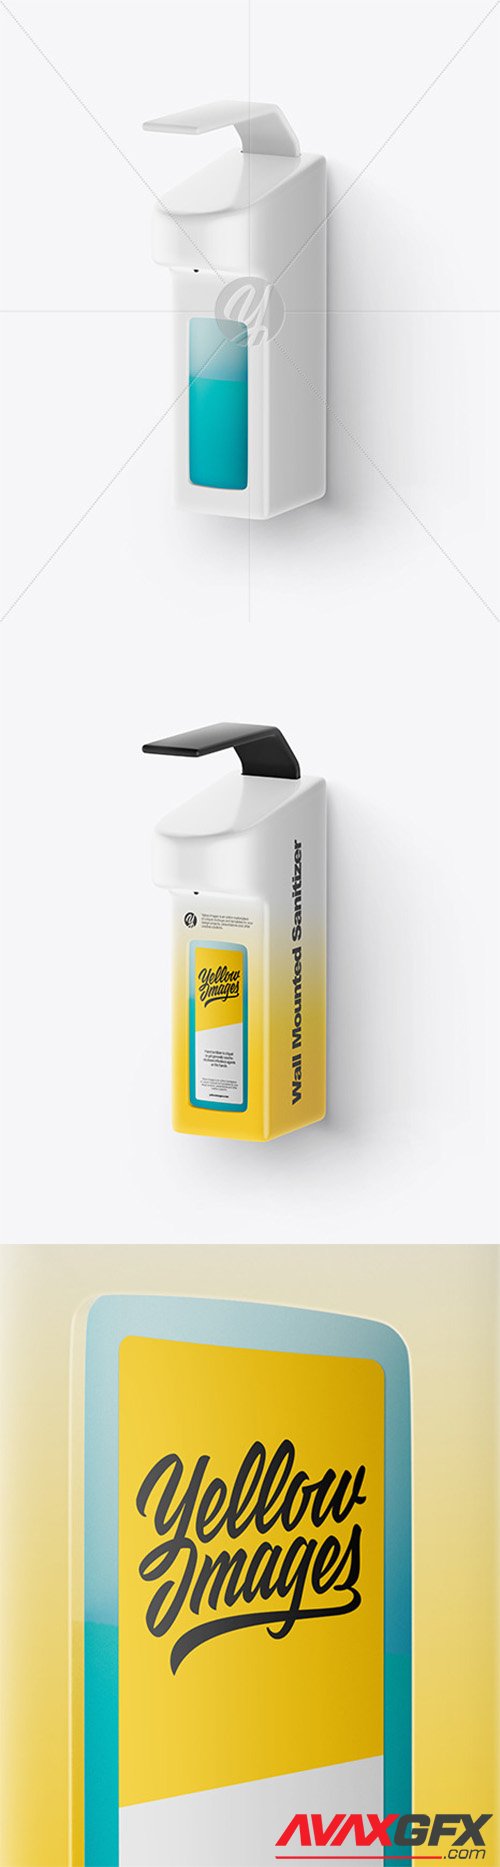 Wall Dispenser with Hand Sanitizer Mockup 58512